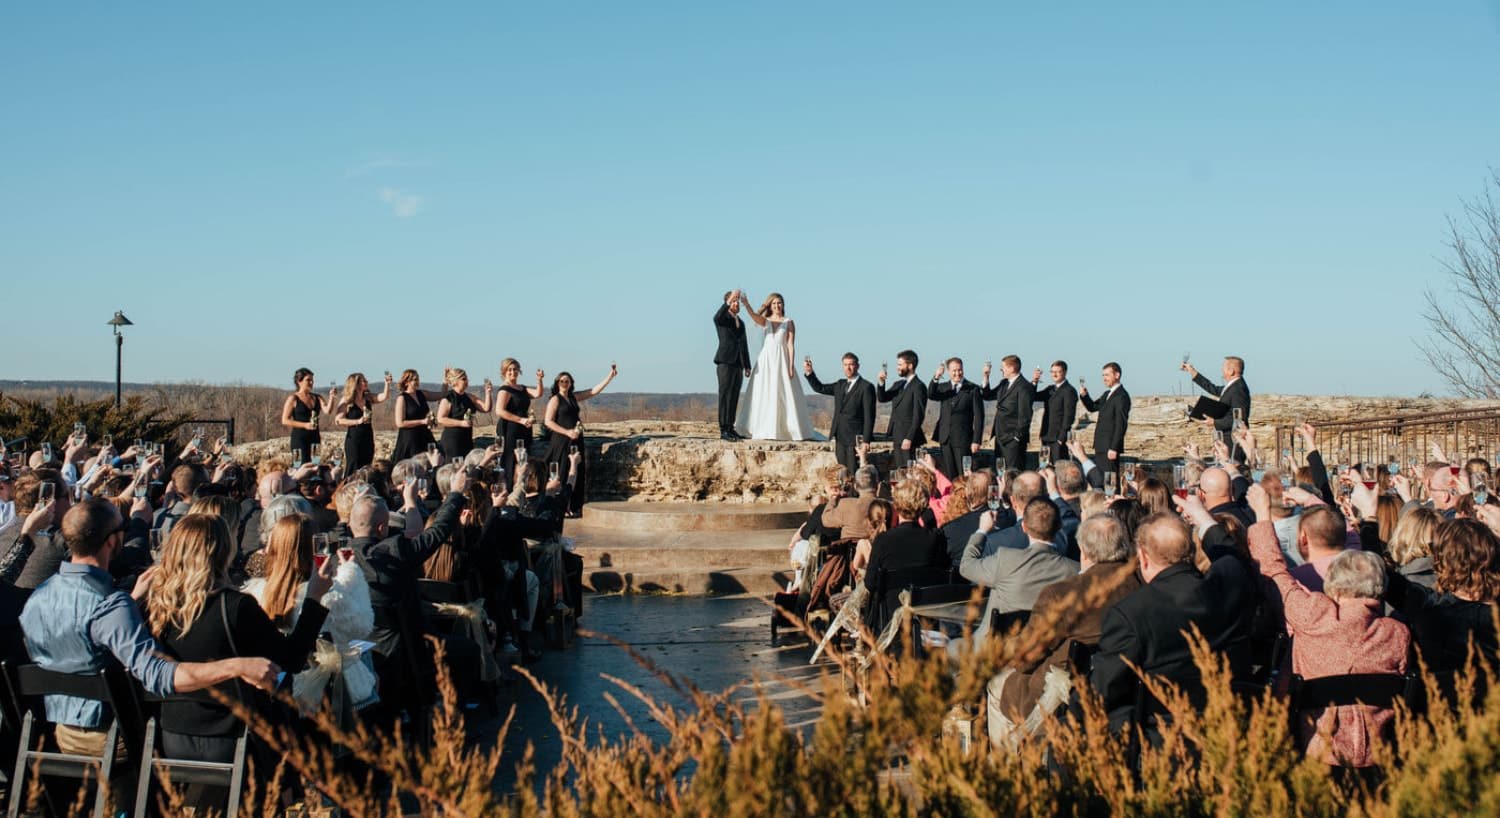 Wedding party standing on and near a large rock with seated guests all toasting the bride and groom in an outside venue